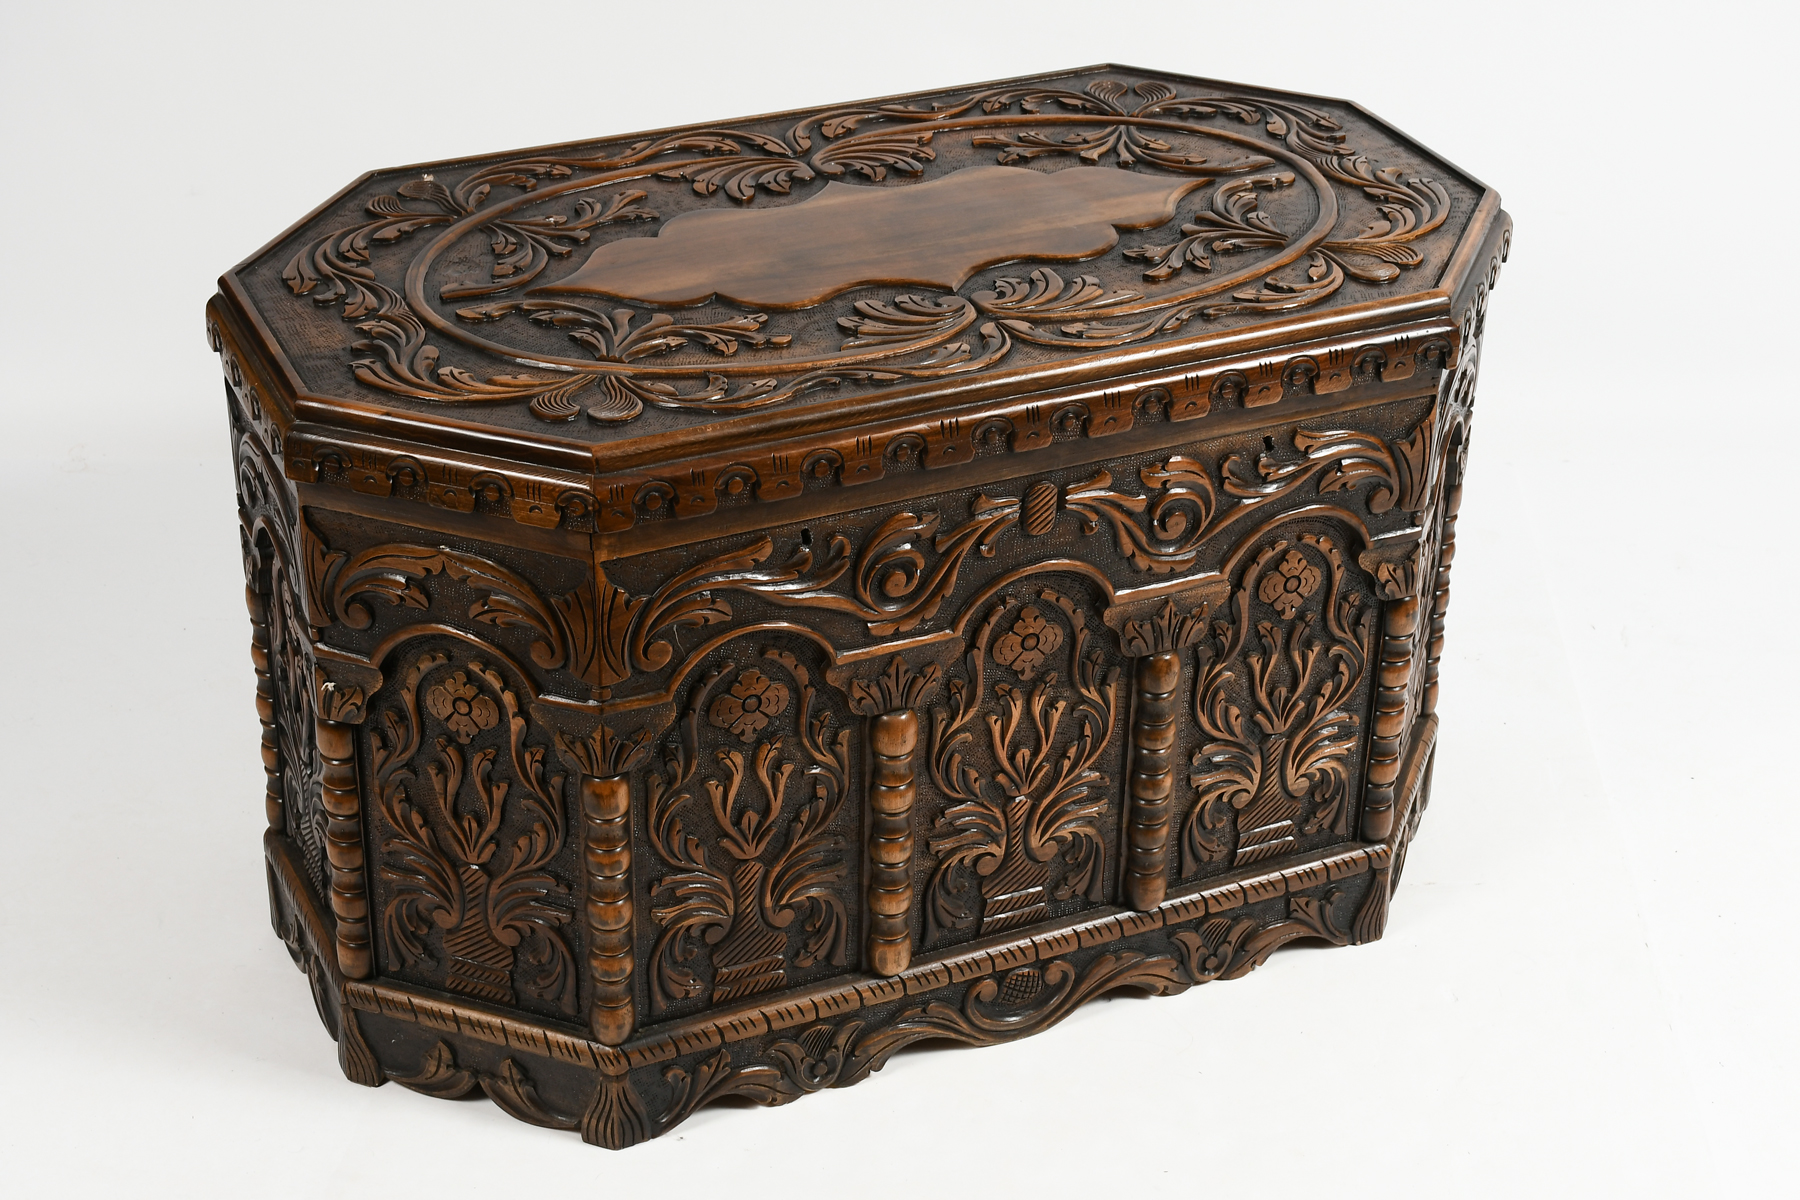 HIGHLY CARVED SPANISH DOWERY CHEST: